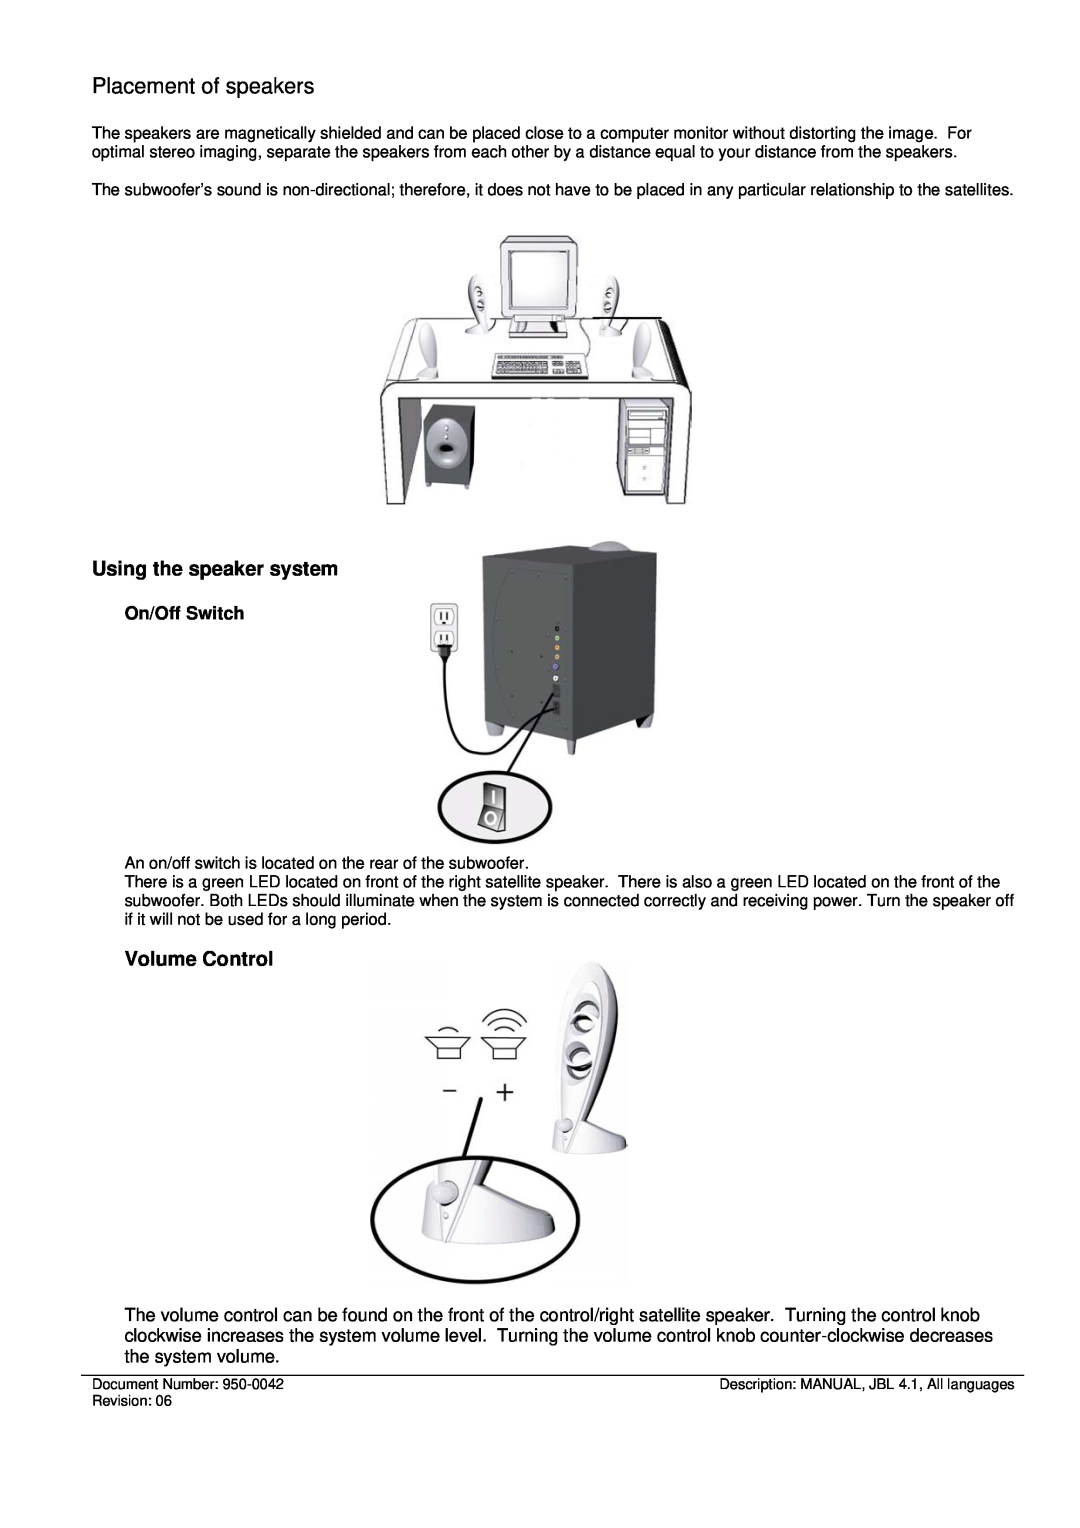 JBL INVADER manual Placement of speakers, Using the speaker system, Volume Control, On/Off Switch 